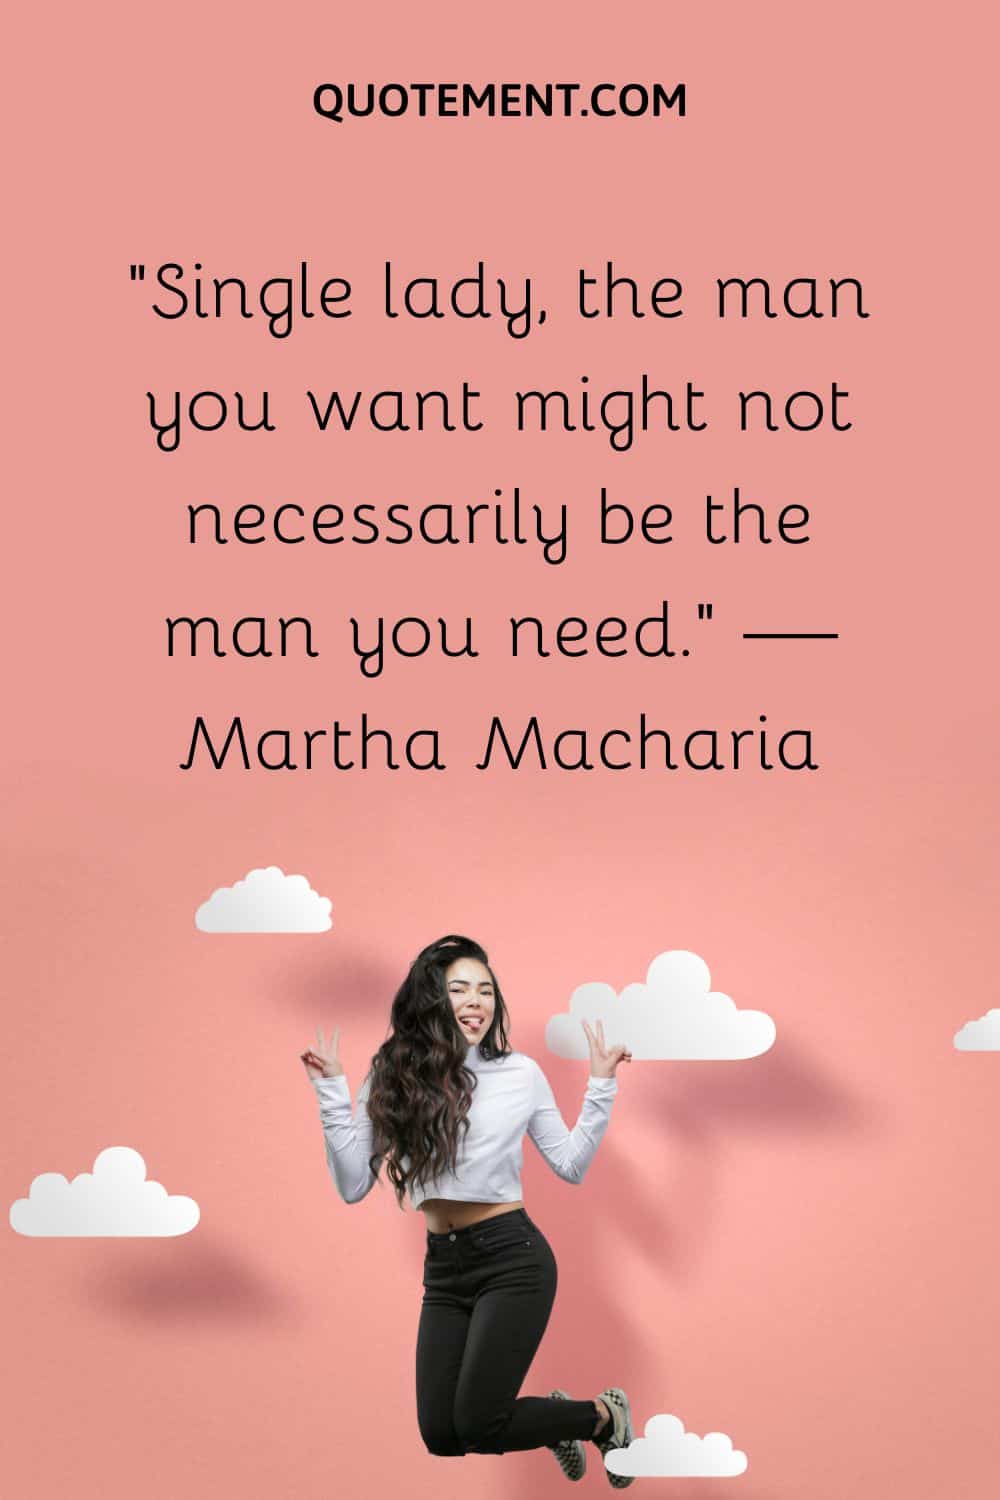 Single lady, the man you want might not necessarily be the man you need.